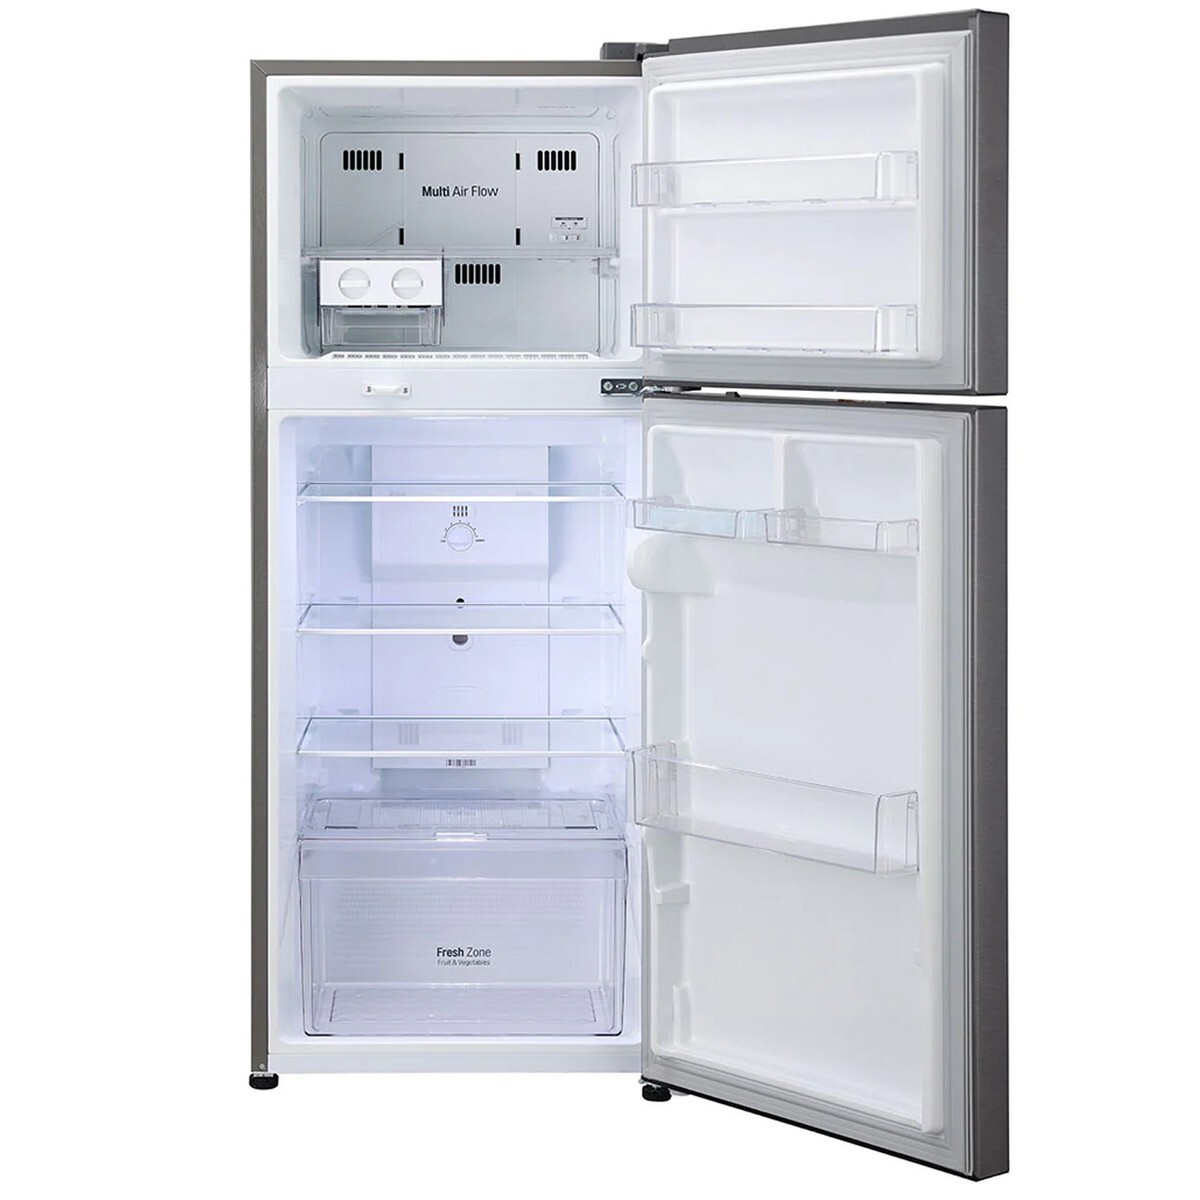 LG Frost Free Double Door Refrigerator GL-N292RDSY 260Ltr